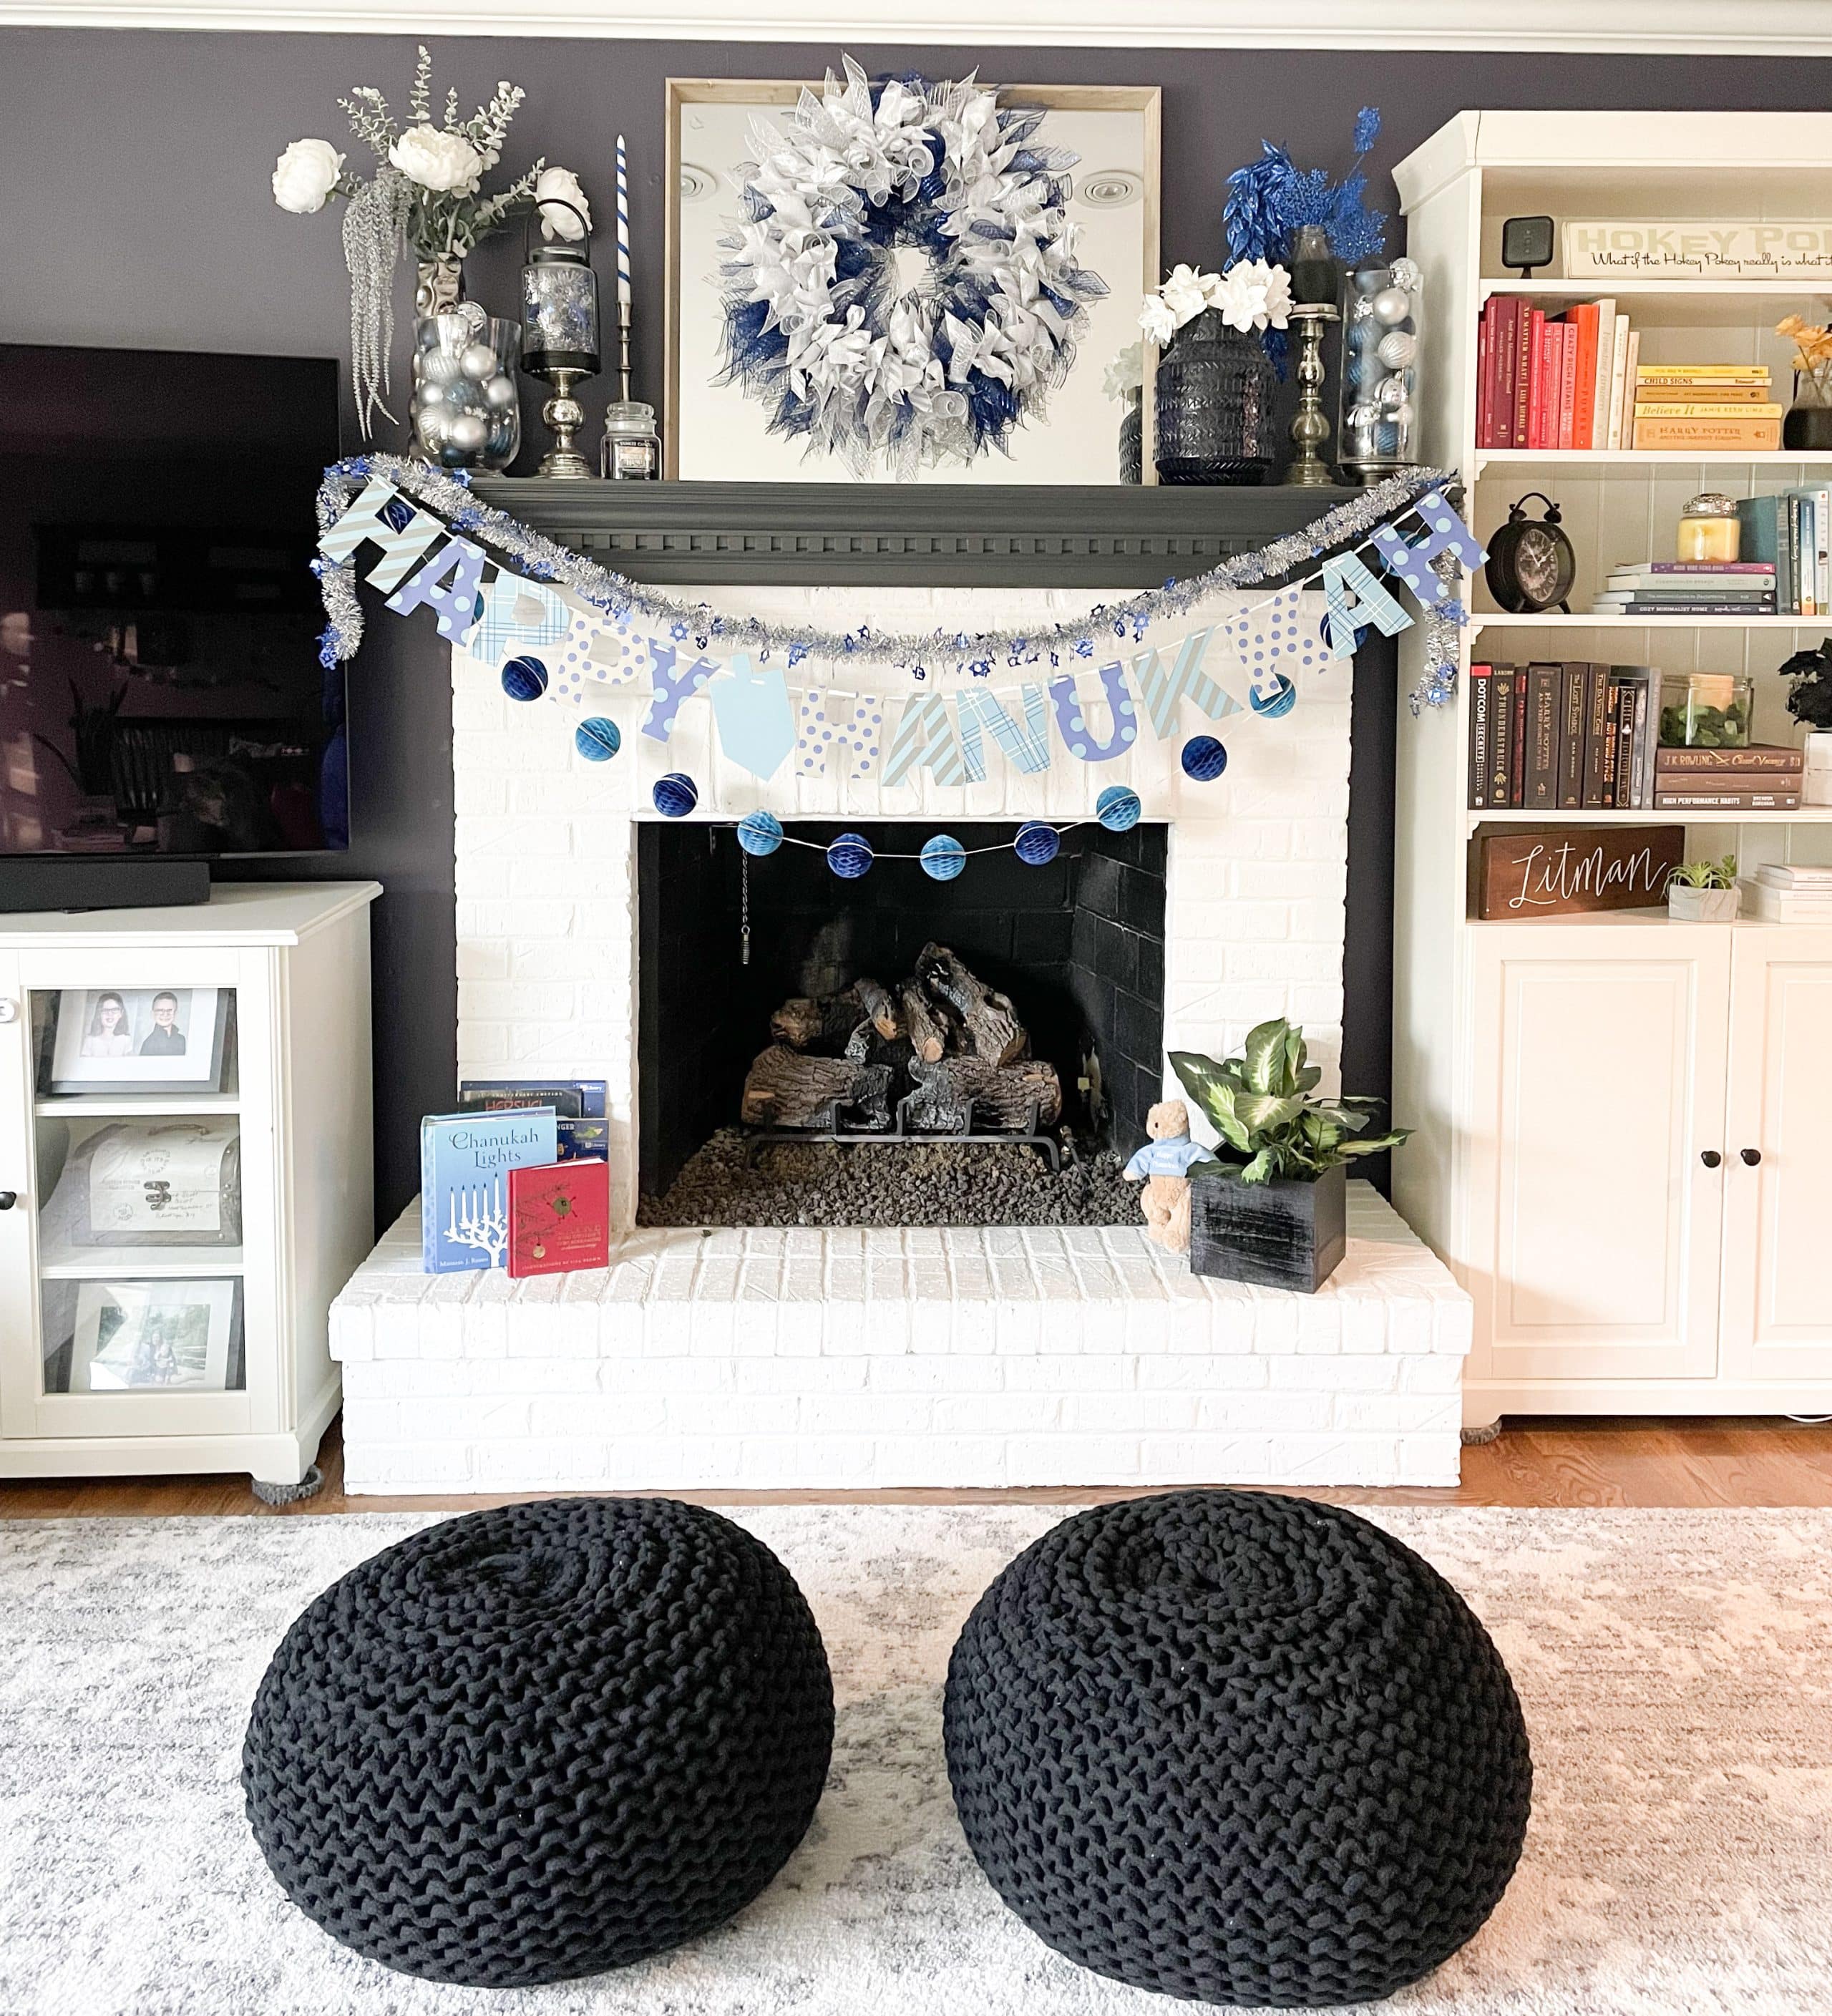 family room decorated for hanukkah with blue, silver and white decor